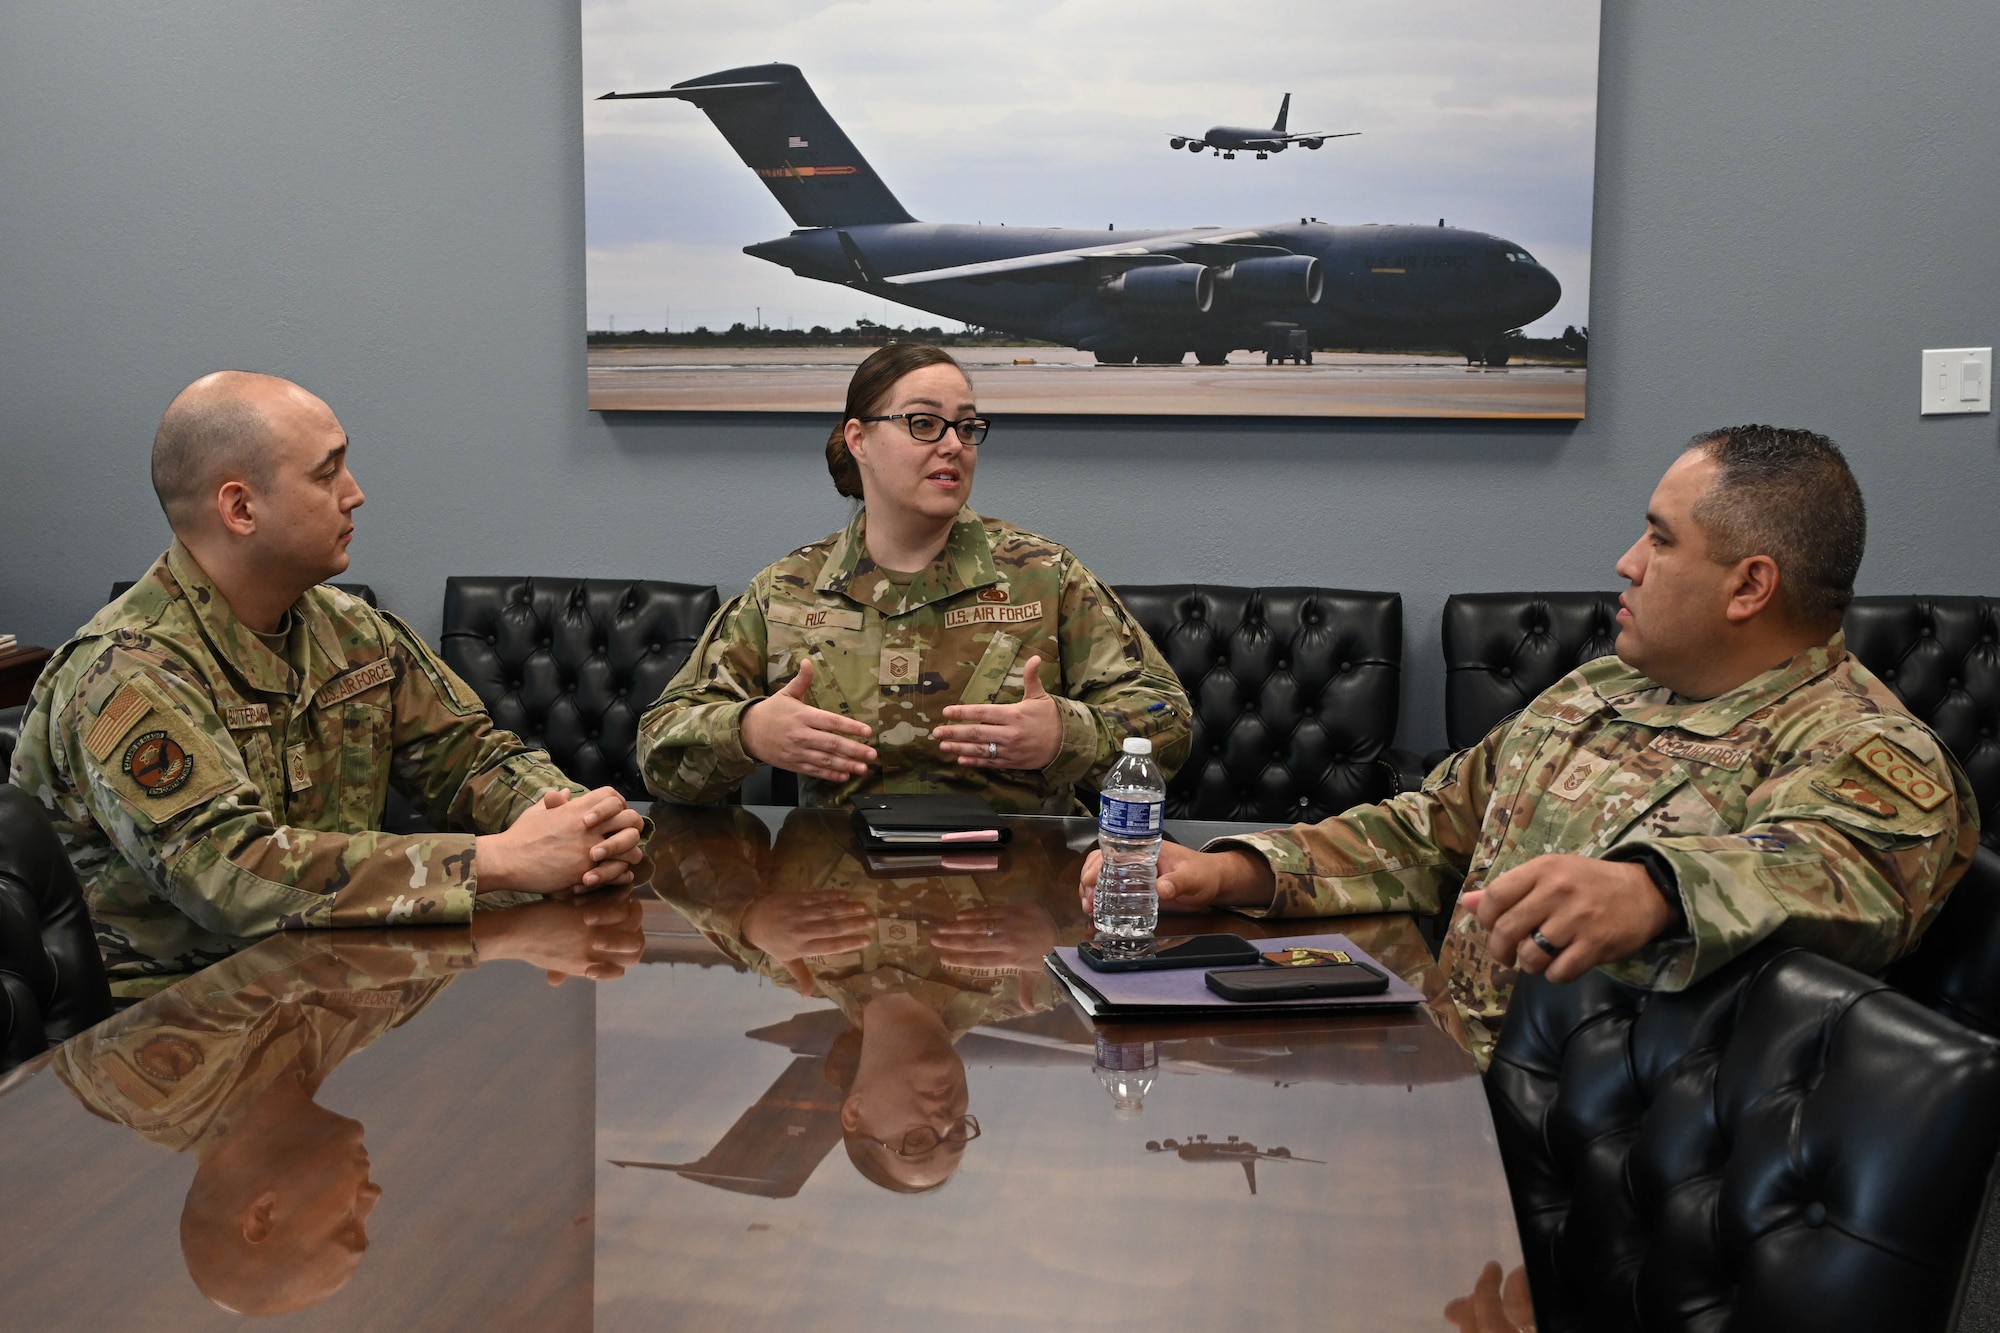 U.S. Air Force Master Sgt. Jesica Ruz (center), 97th Logistics Readiness Squadron superintendent of plans and integration, speaks to Master Sgt. Joshua Butterbaugh (left), 97th Contracting Flight (CONF) senior enlisted leader, and Chief Master Sgt. Christopher Trevino (right), Air Force Installation Contracting Agency (AFICC/KT) chief enlisted manager, at Altus Air Force Base, Oklahoma, April 3, 2024. Airmen and leadership from the 97th Mission Support Group and 97th CONF met with AFICC/KT leadership to familiarize them with the 97th CONF mission. (U.S. Air Force photo by Senior Airman Miyah Gray)